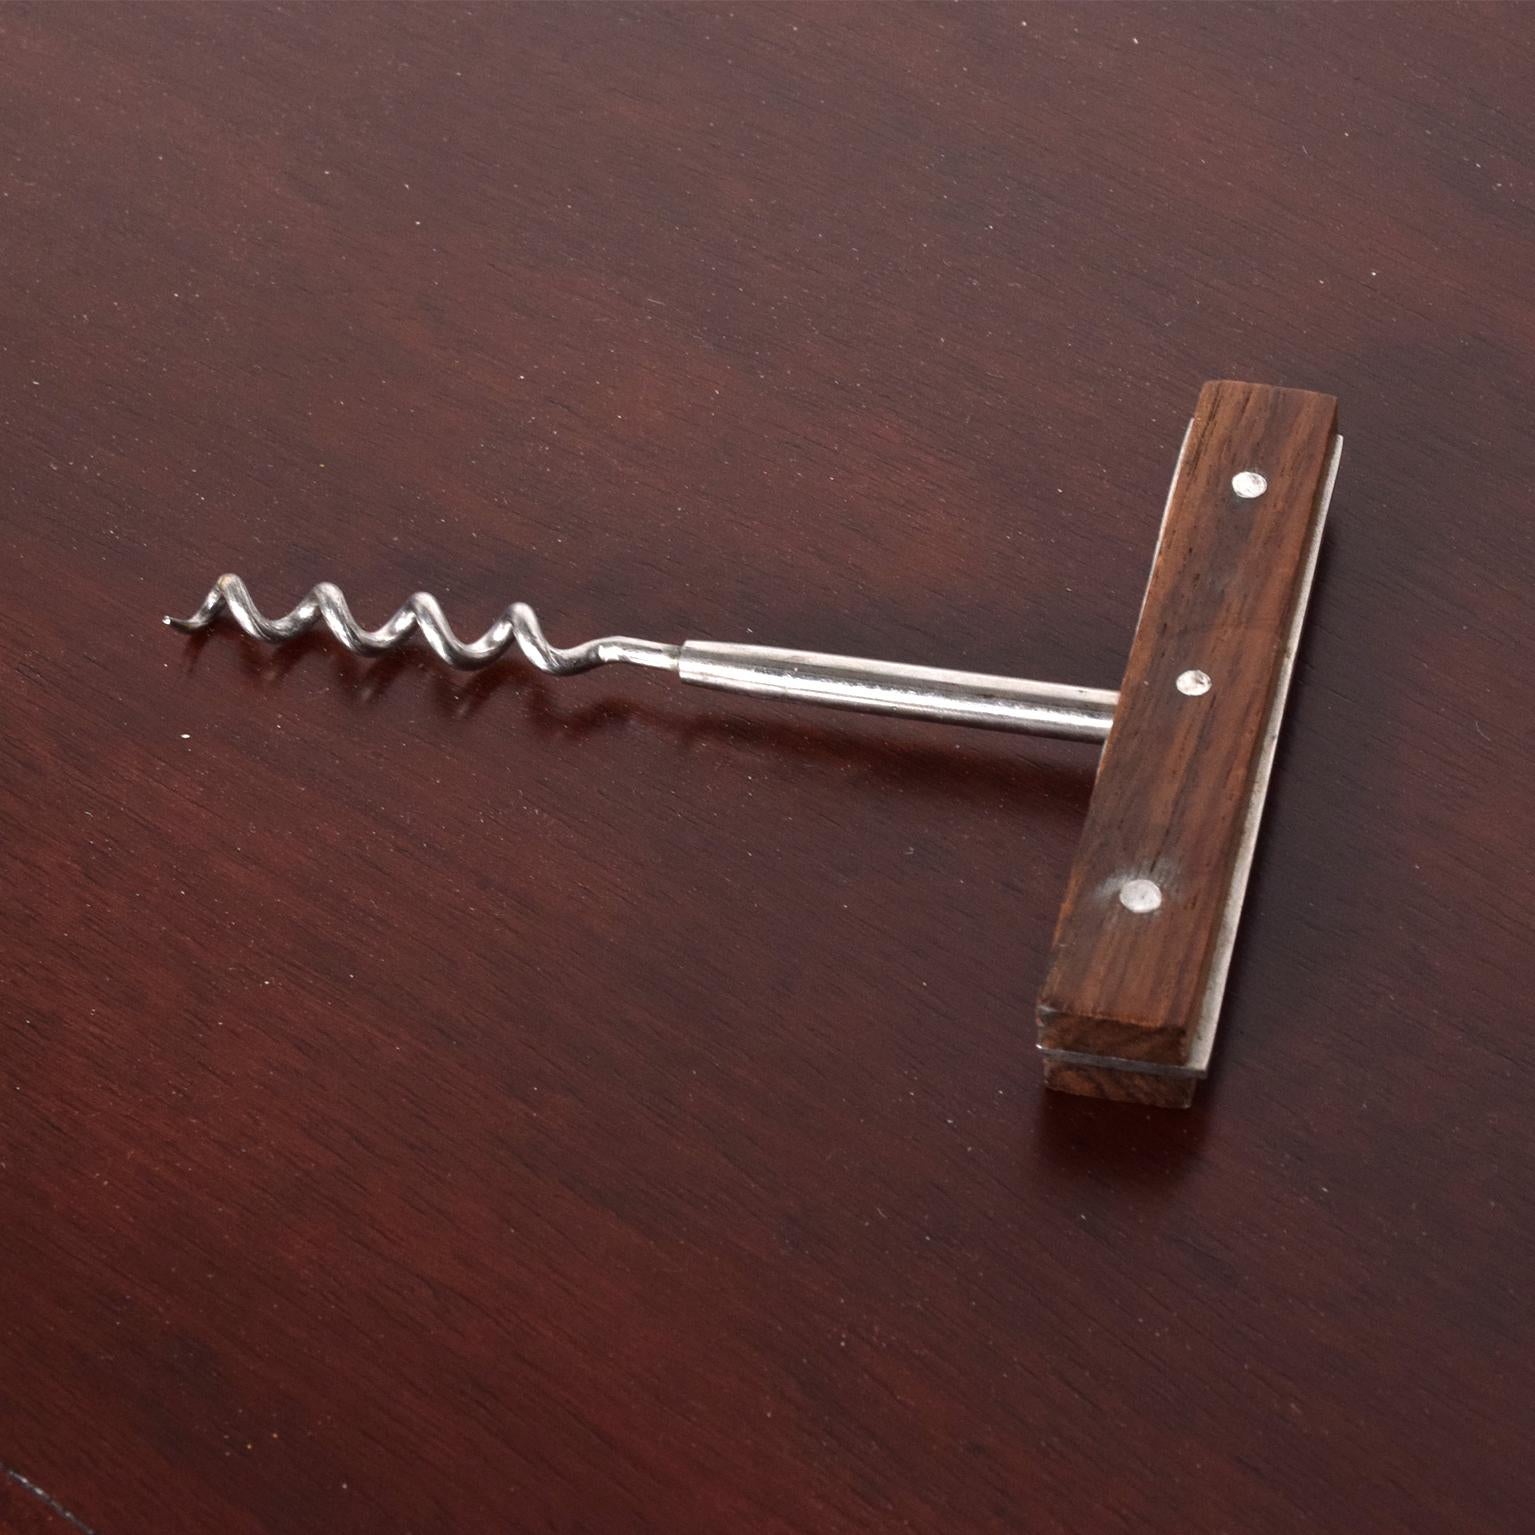 For your consideration a vintage Mid-Century Modern cork opener. 
Stainless steel with rosewood handles. Stamped 